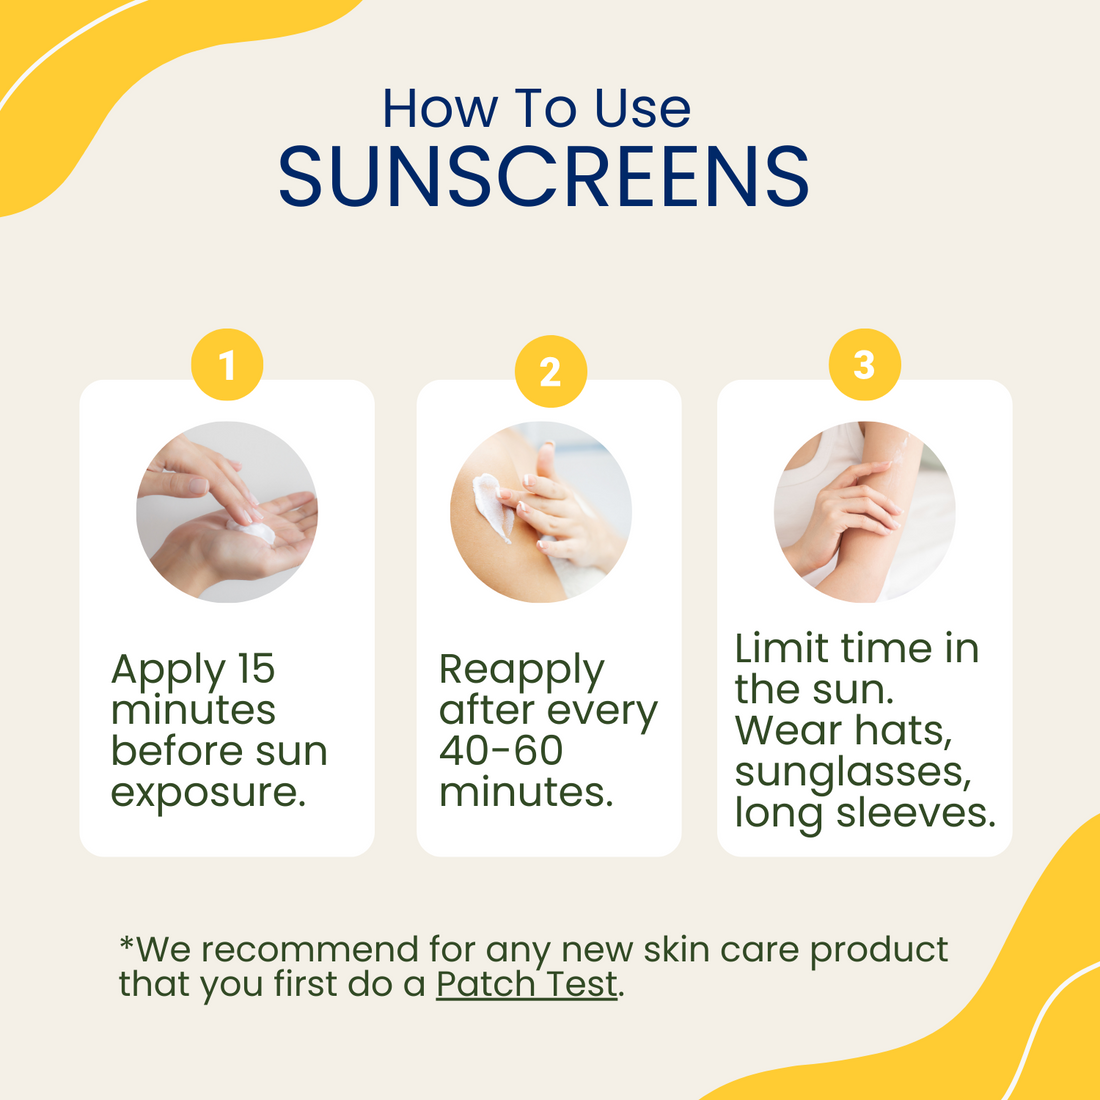 TruKid Sunny Days Daily SPF30 Sunscreen How to Use